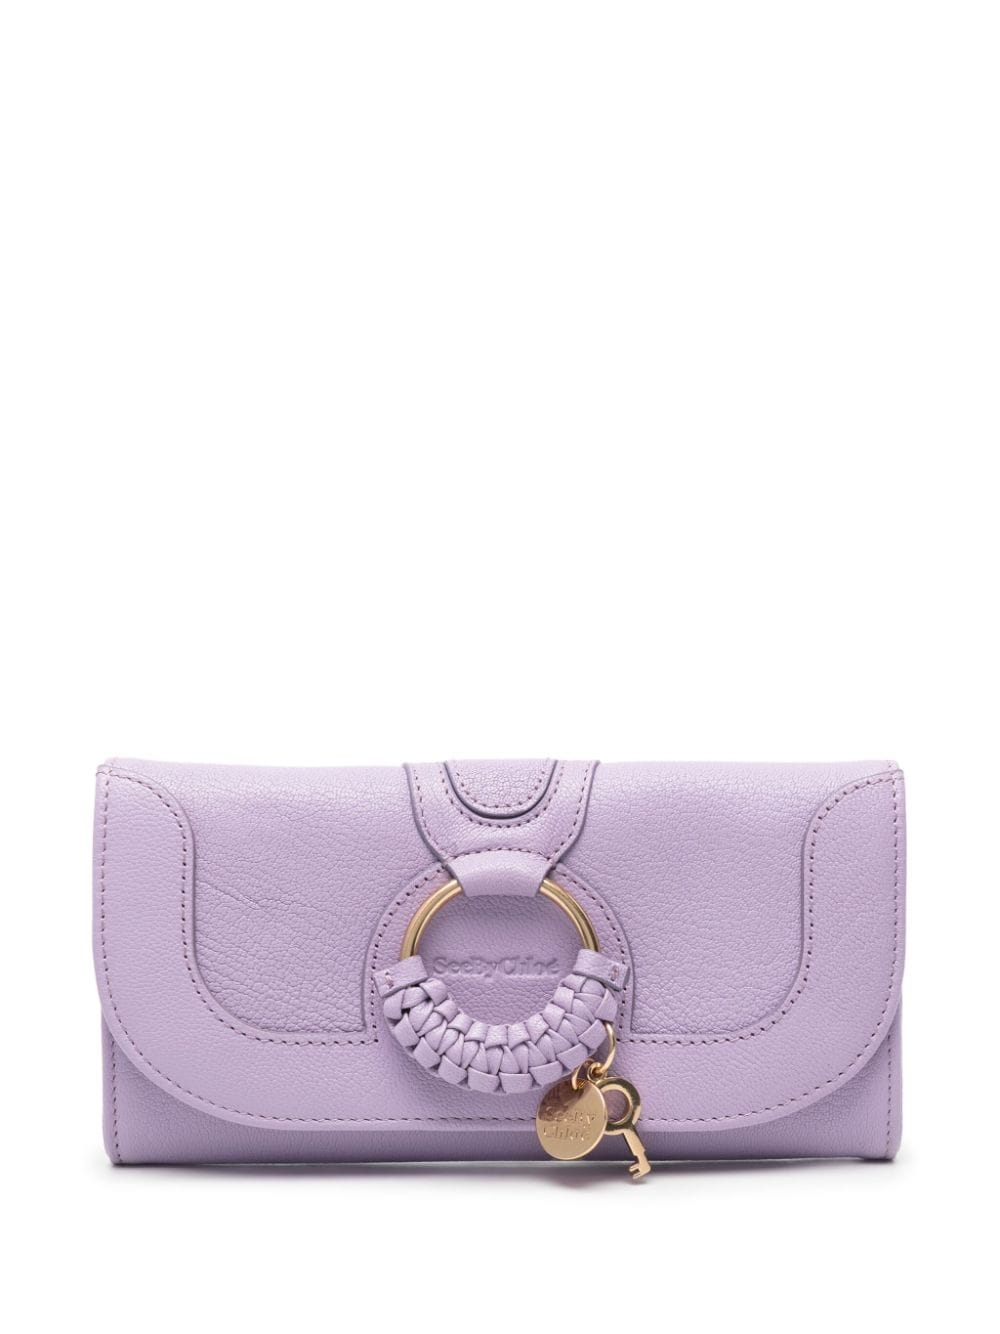 See by Chloé Hana leather wallet - Purple von See by Chloé